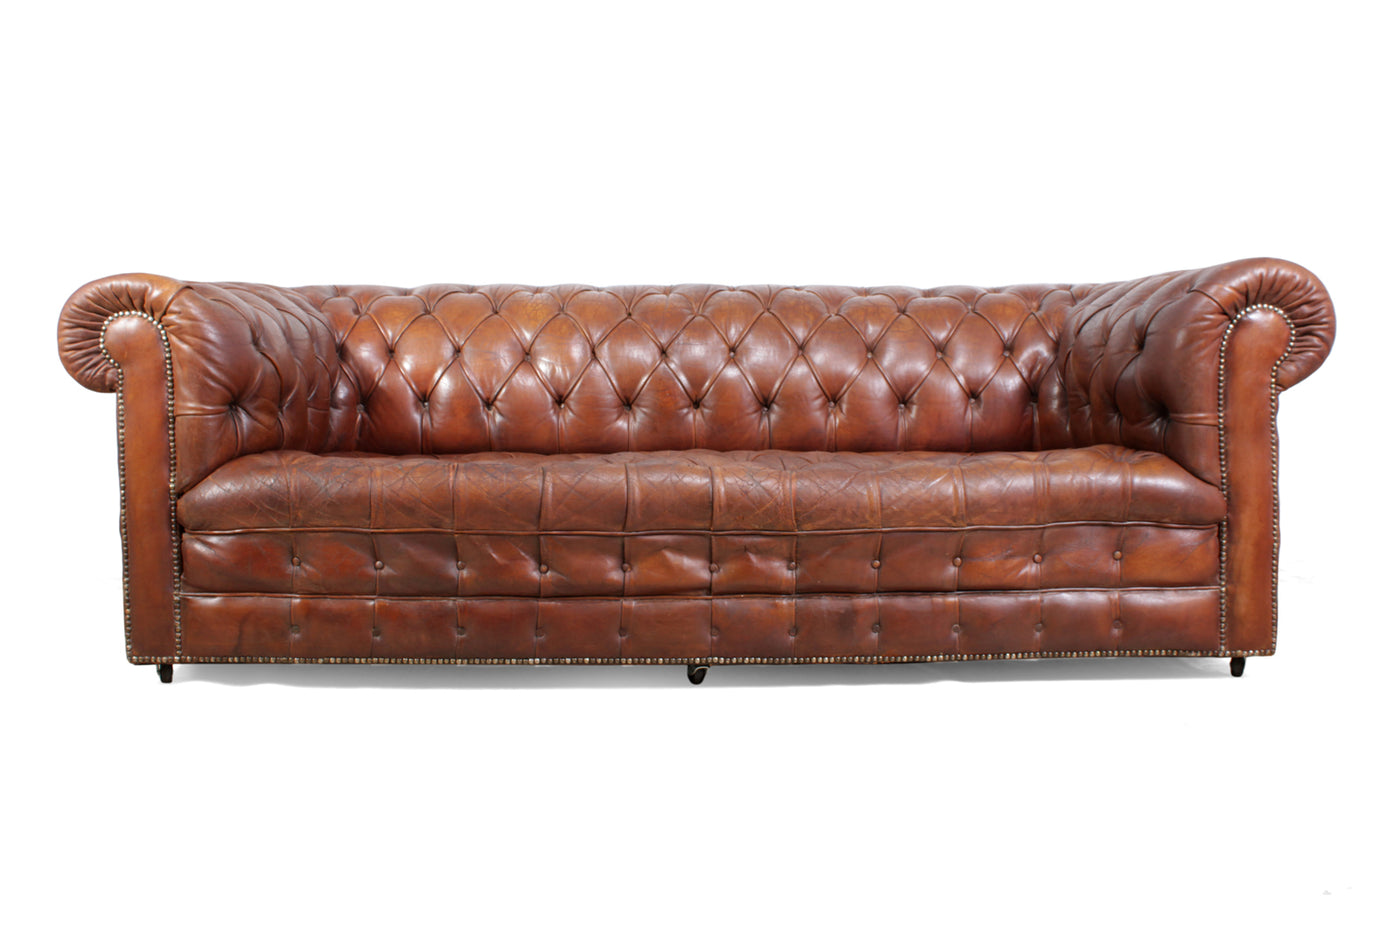 Vintage brown Leather chesterfield with Buttoned Seat and Back